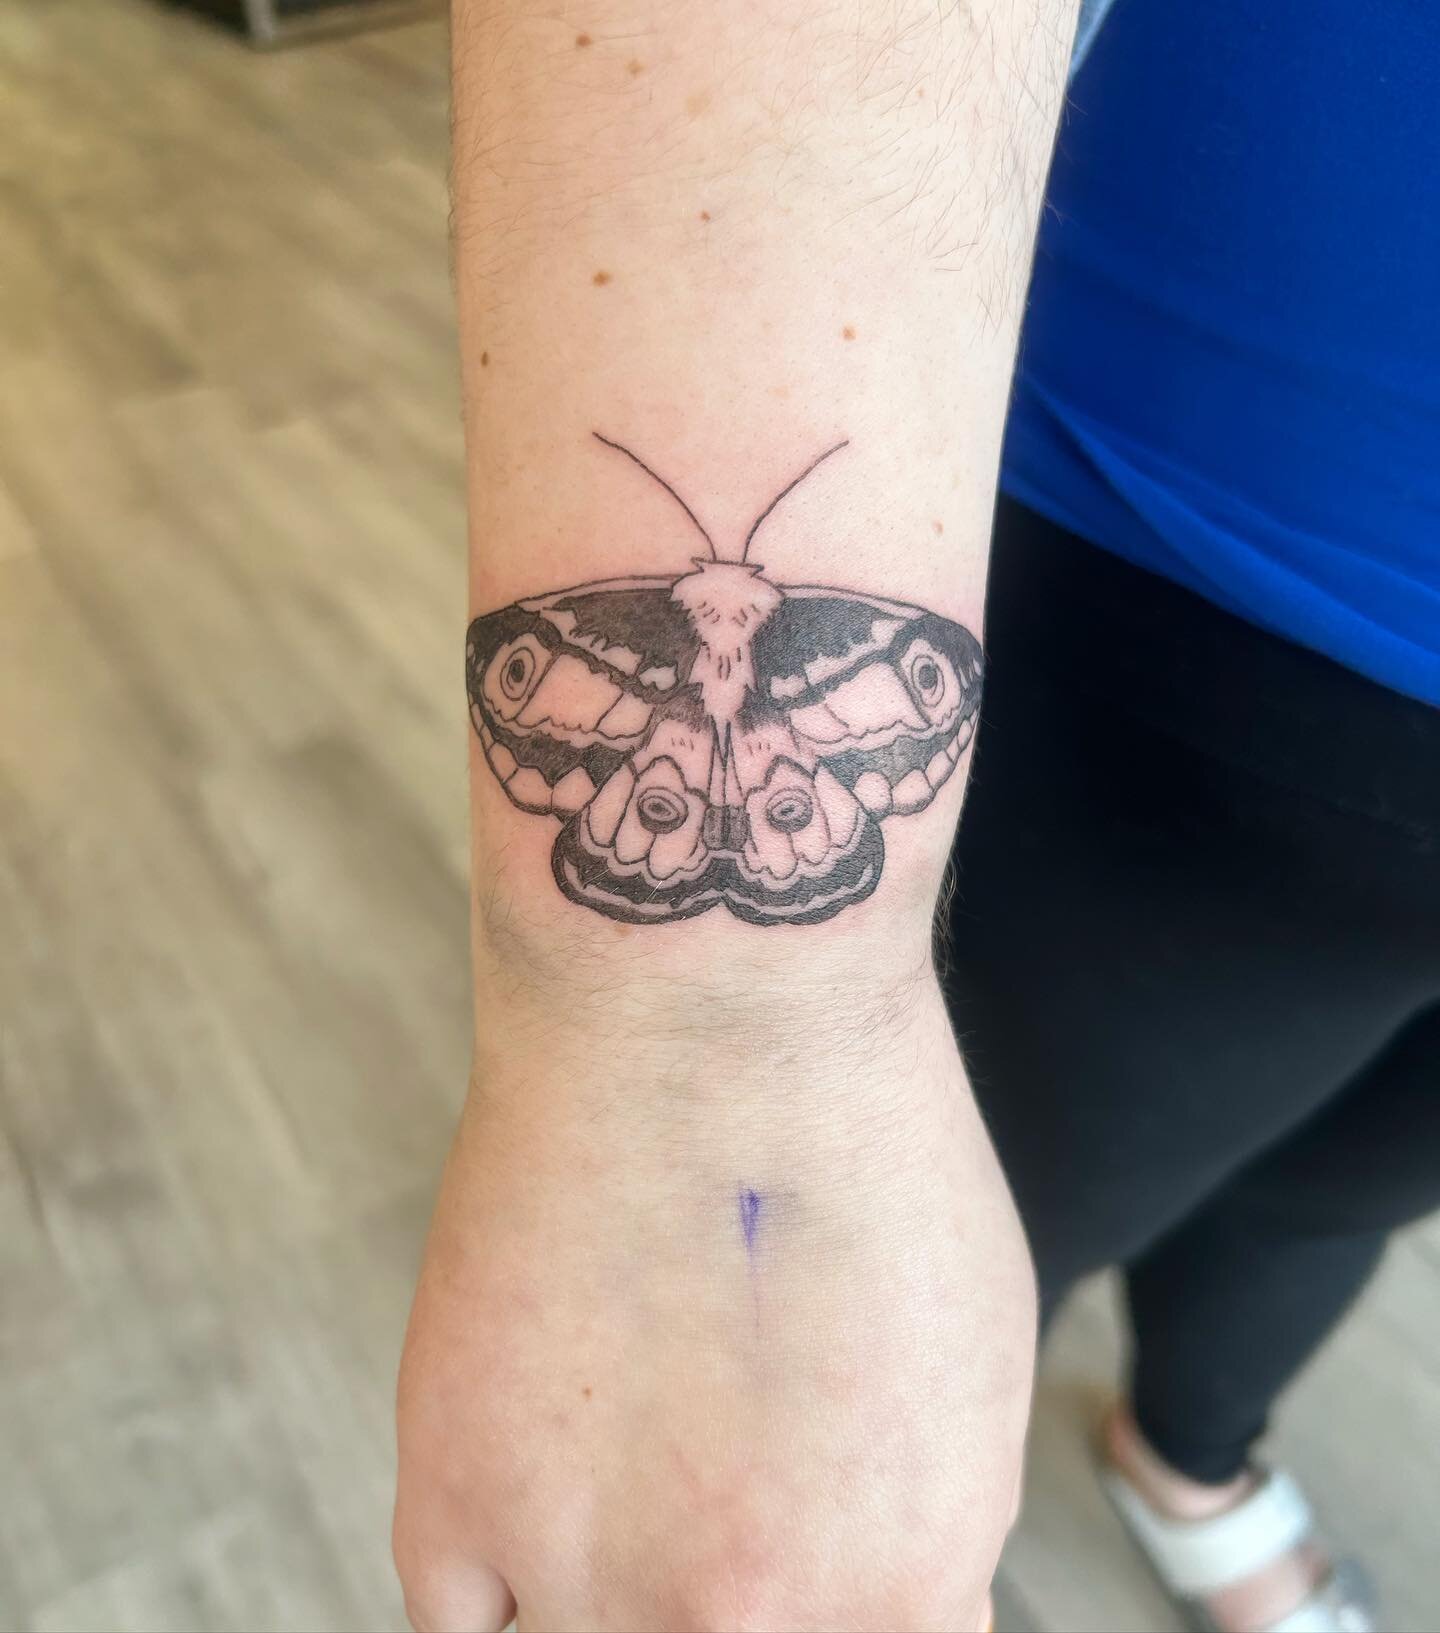 Wrist moth for Emily!! Thank you again!!